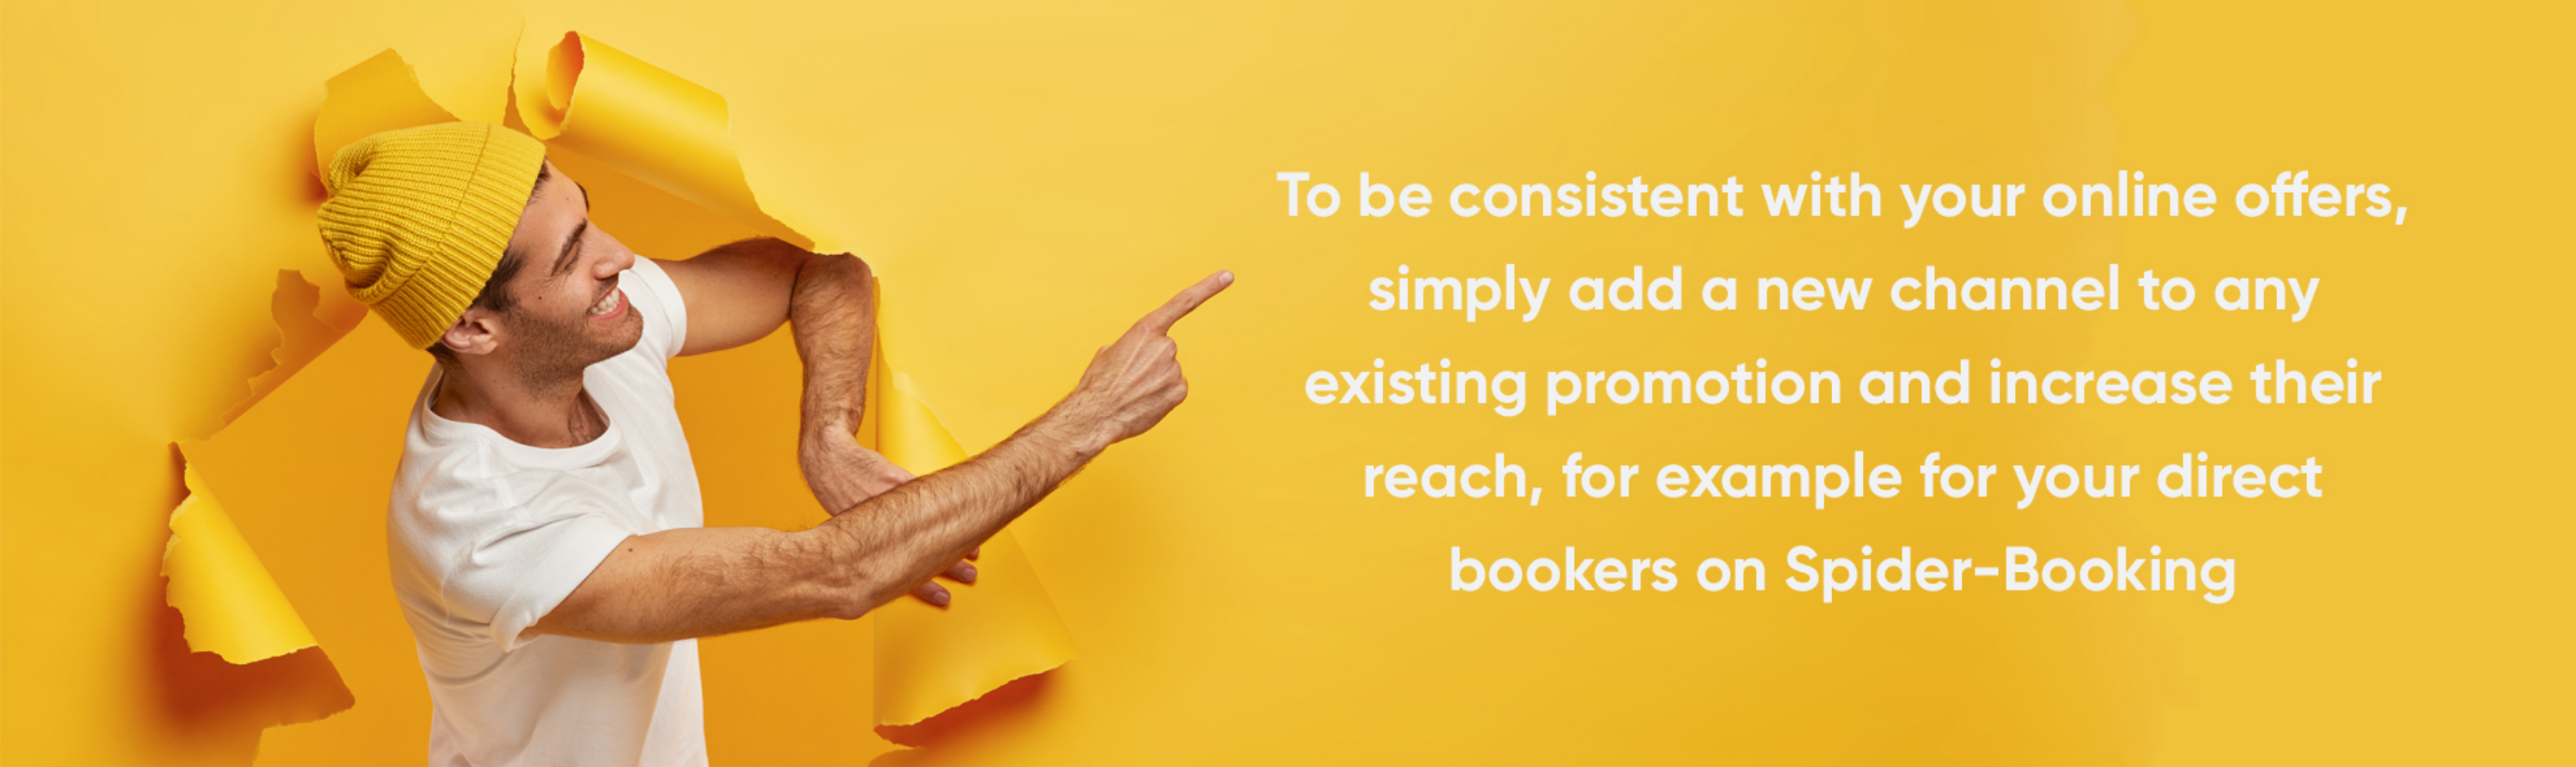 To be consistent with your online offers, simply add a new channel to any existing promotion and increase their reach, for example for your direct bookers on Spider-Booking.  